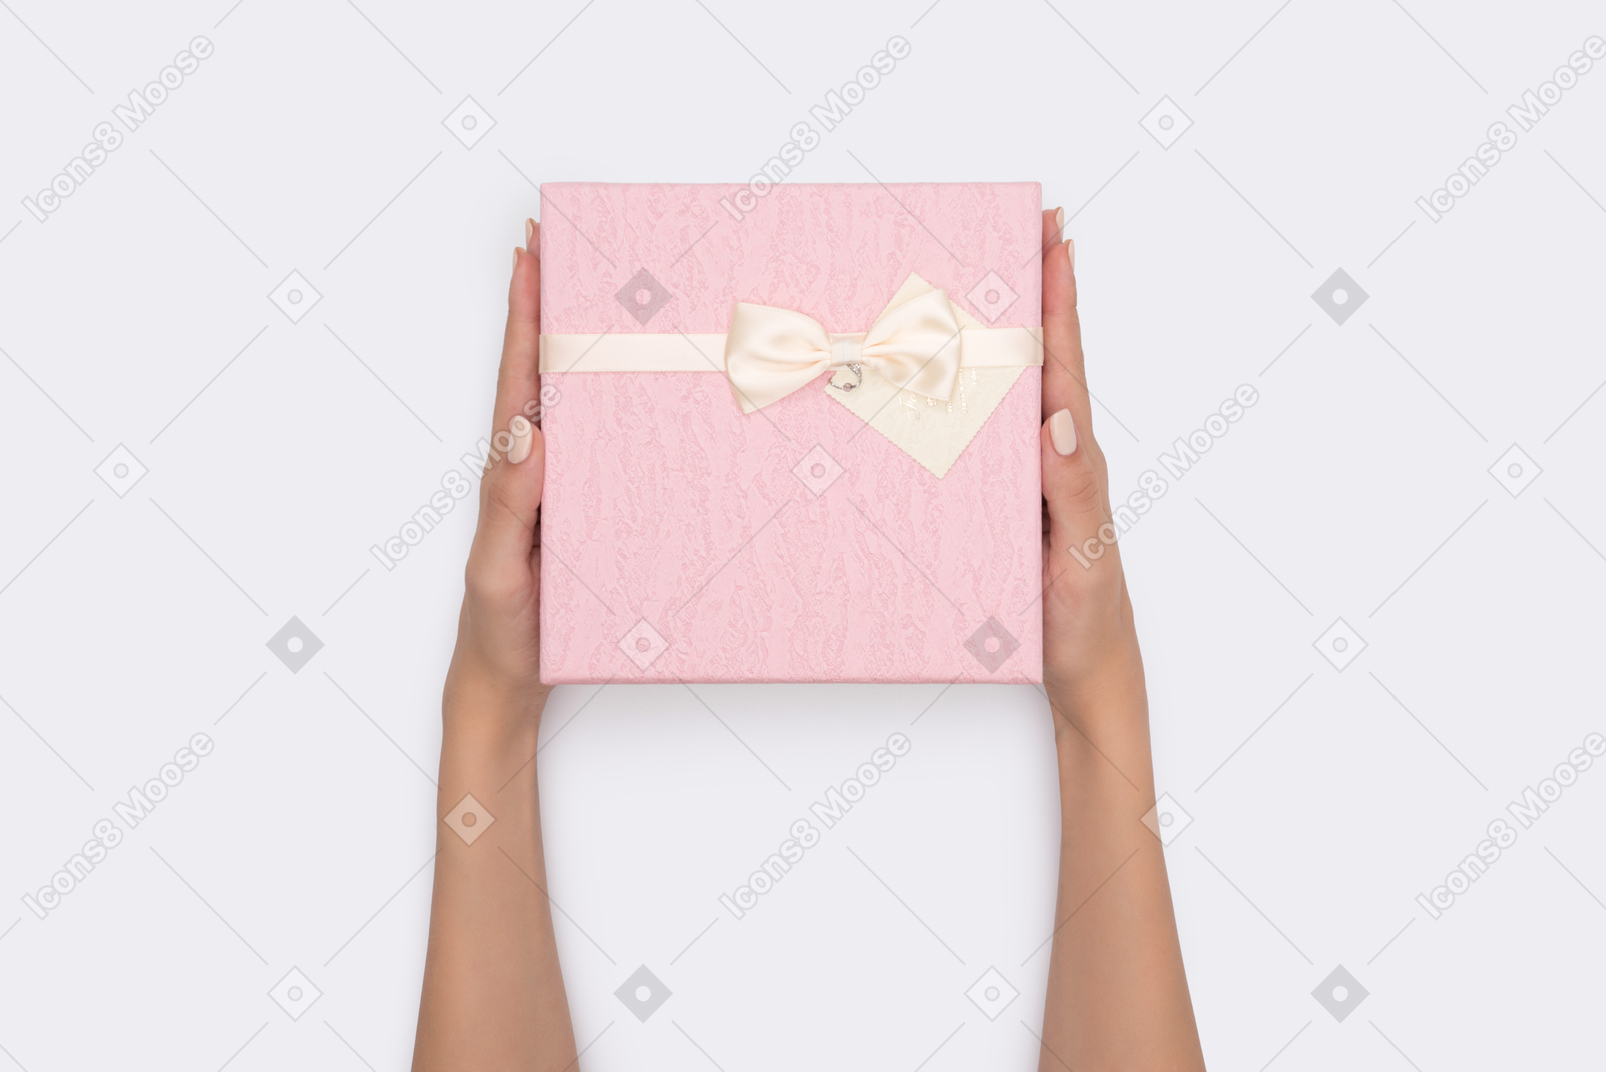 Female hands holding pink gift box